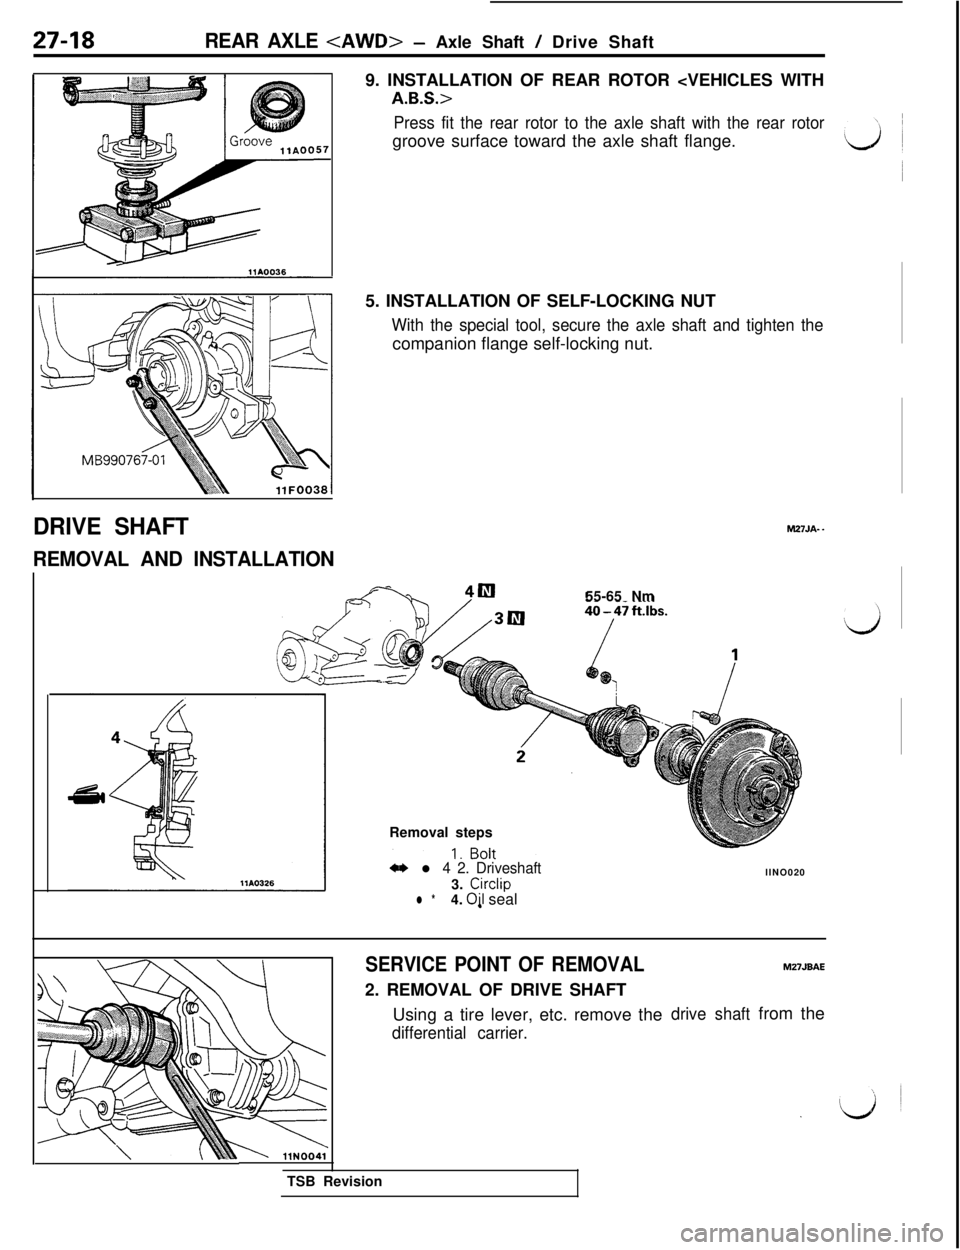 MITSUBISHI 3000GT 1991 User Guide 27-18REAR AXLE <AWD>- Axle Shaft / Drive Shaft
57-9. INSTALLATION OF REAR ROTOR <VEHICLES WITHA.B.S.>
Press fit the rear rotor to the axle shaft with the rear rotorgroove surface toward the axle shaft